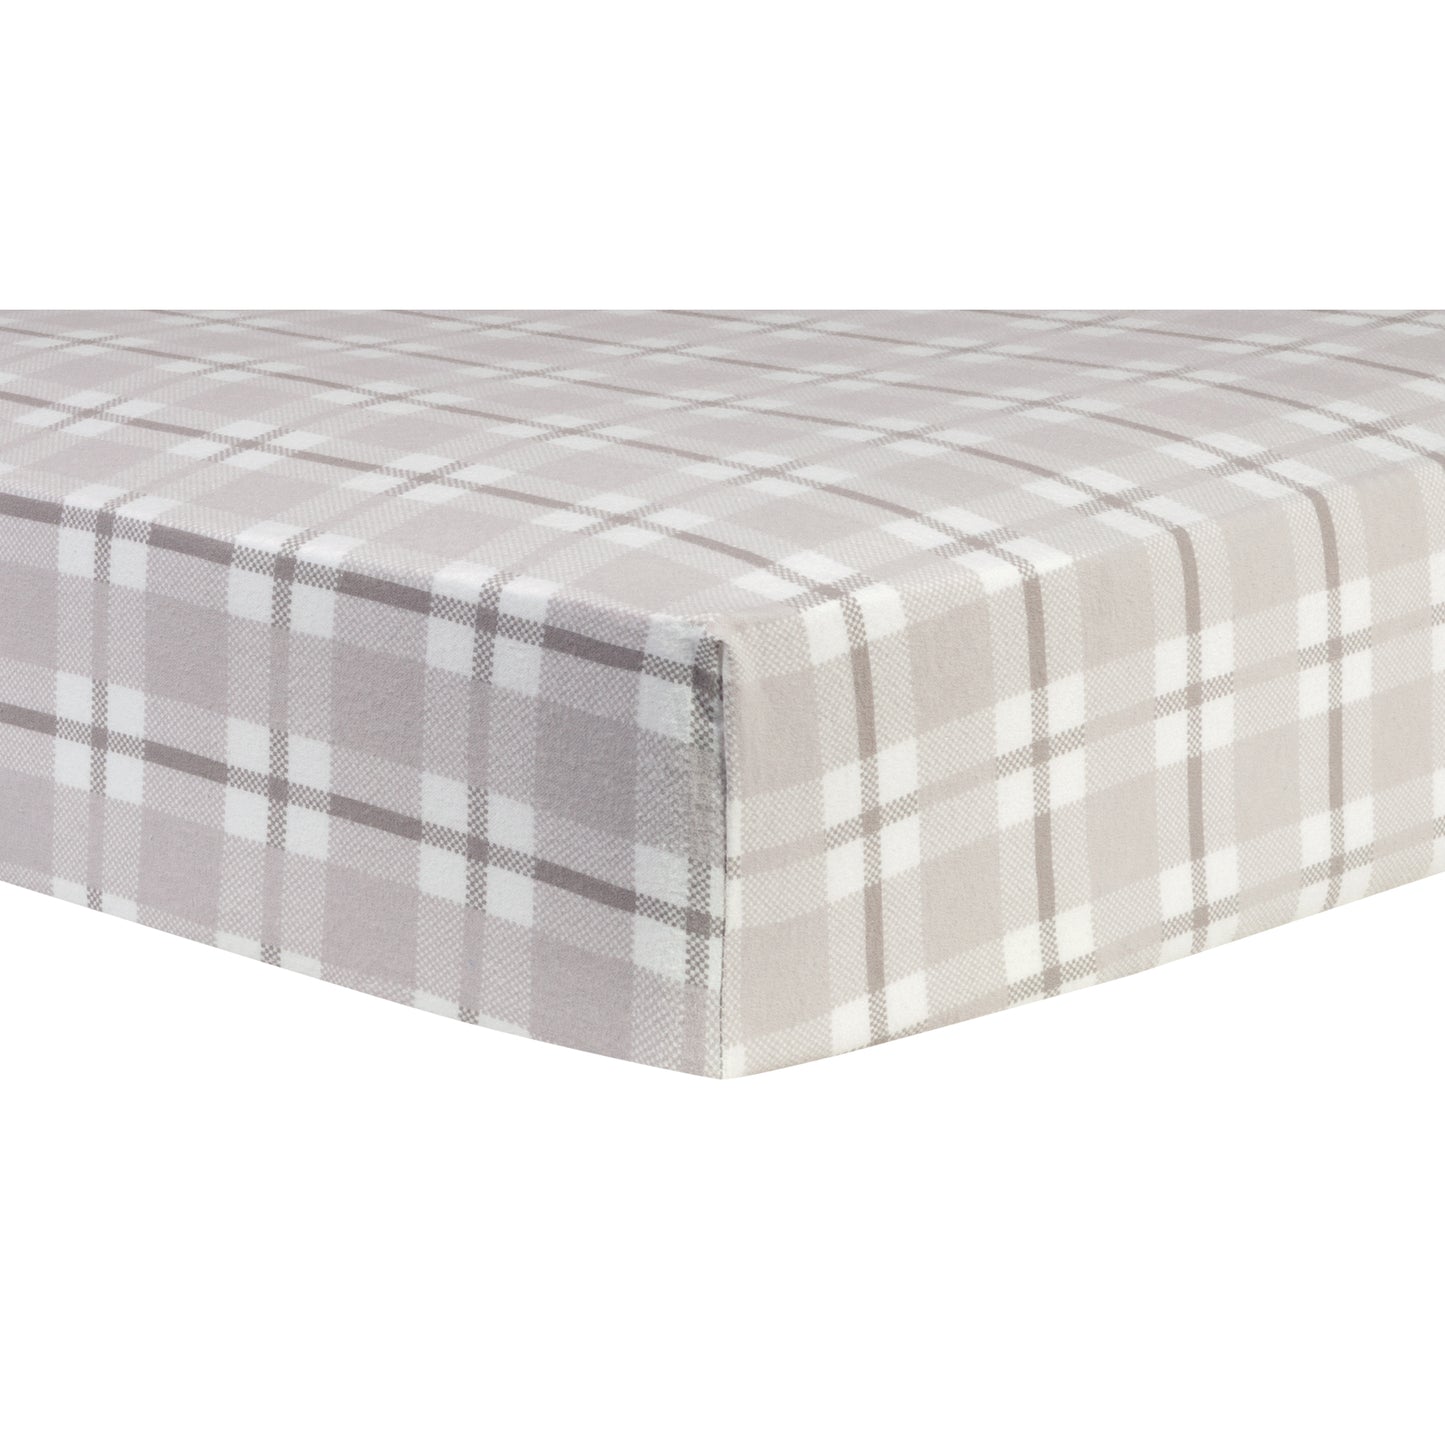  Gray Plaid Deluxe Flannel Fitted Crib Sheet - Corner View